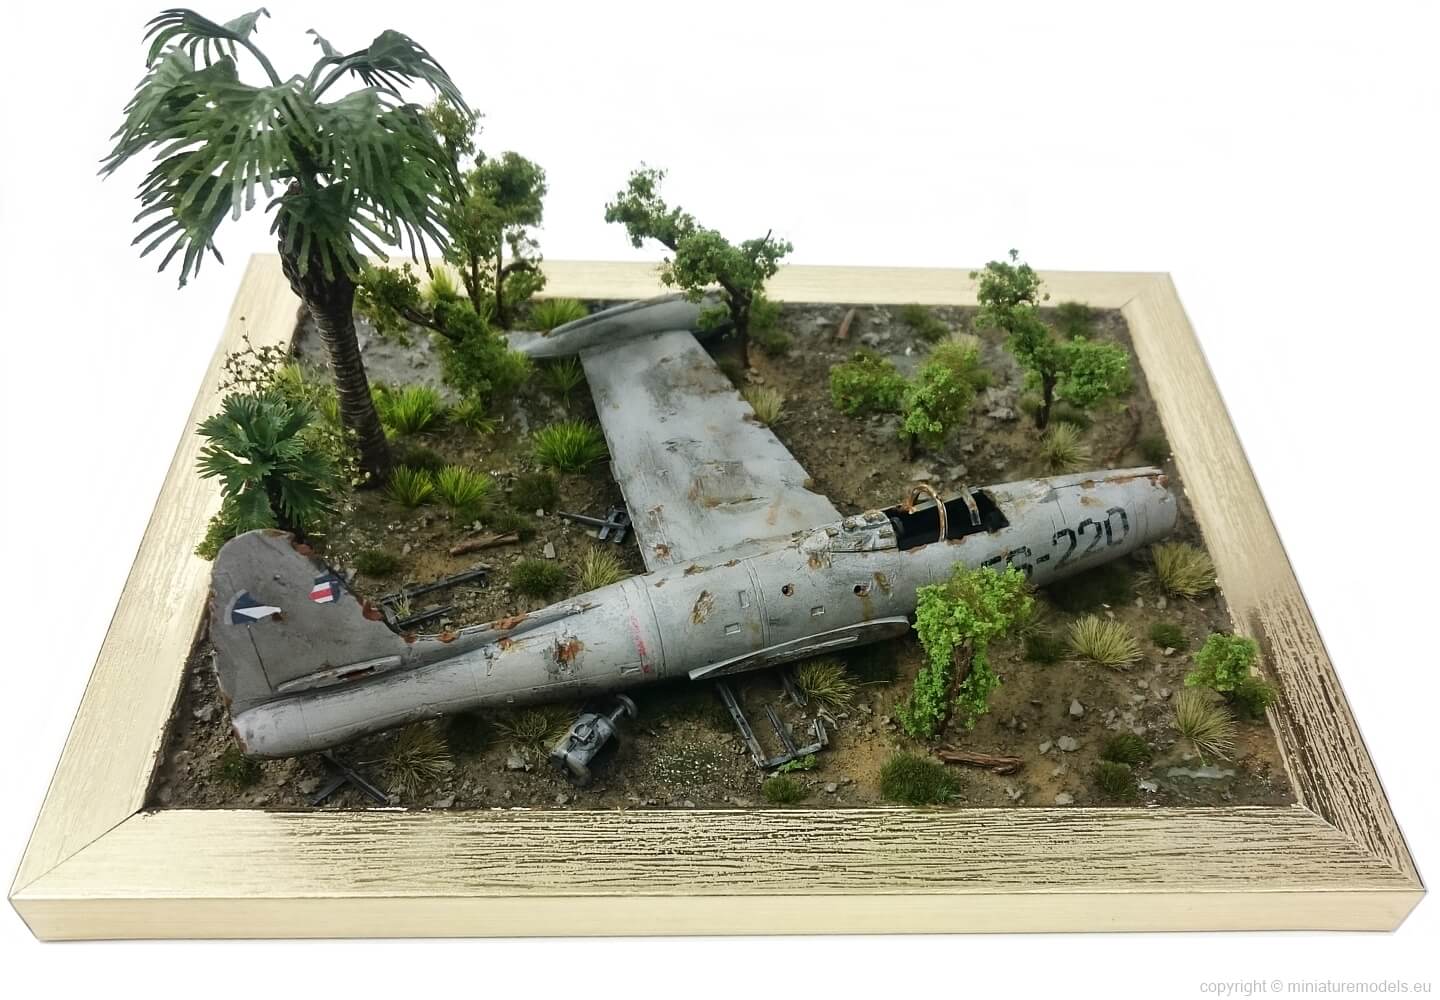 model of destroyed aircraft in Vietnam